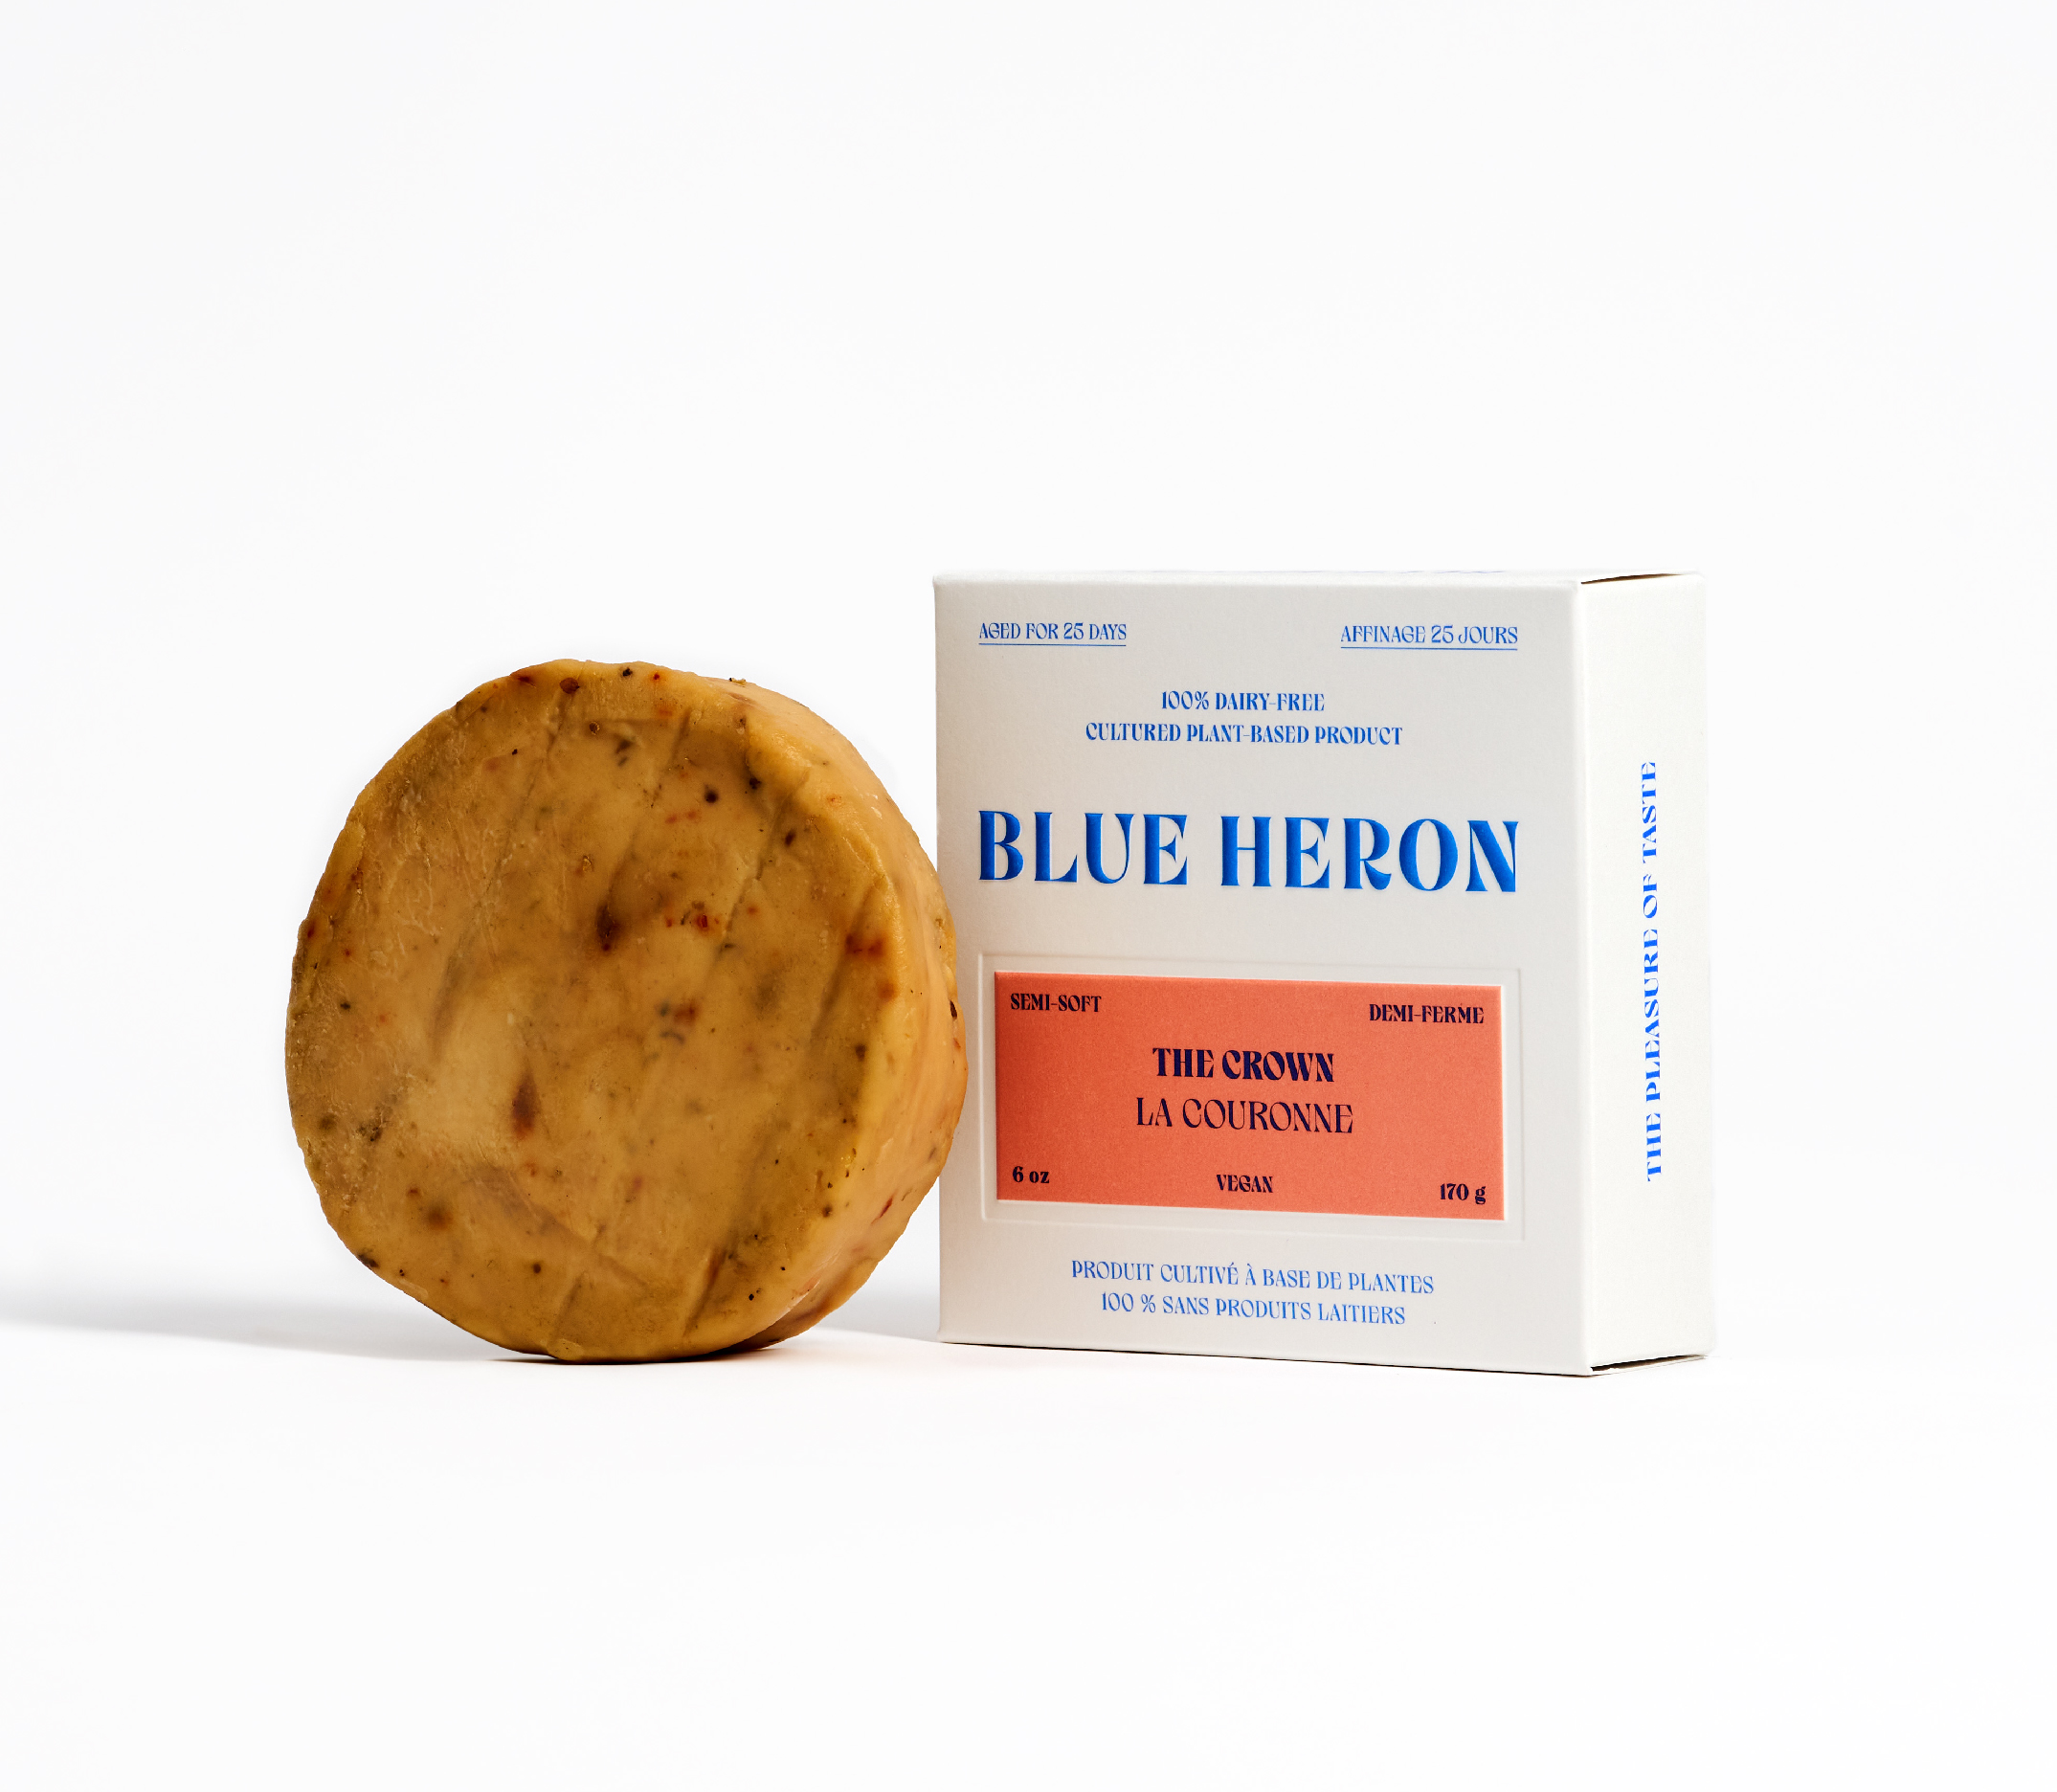 Packaging design for Blue Heron, plant based cheese, The Crown.